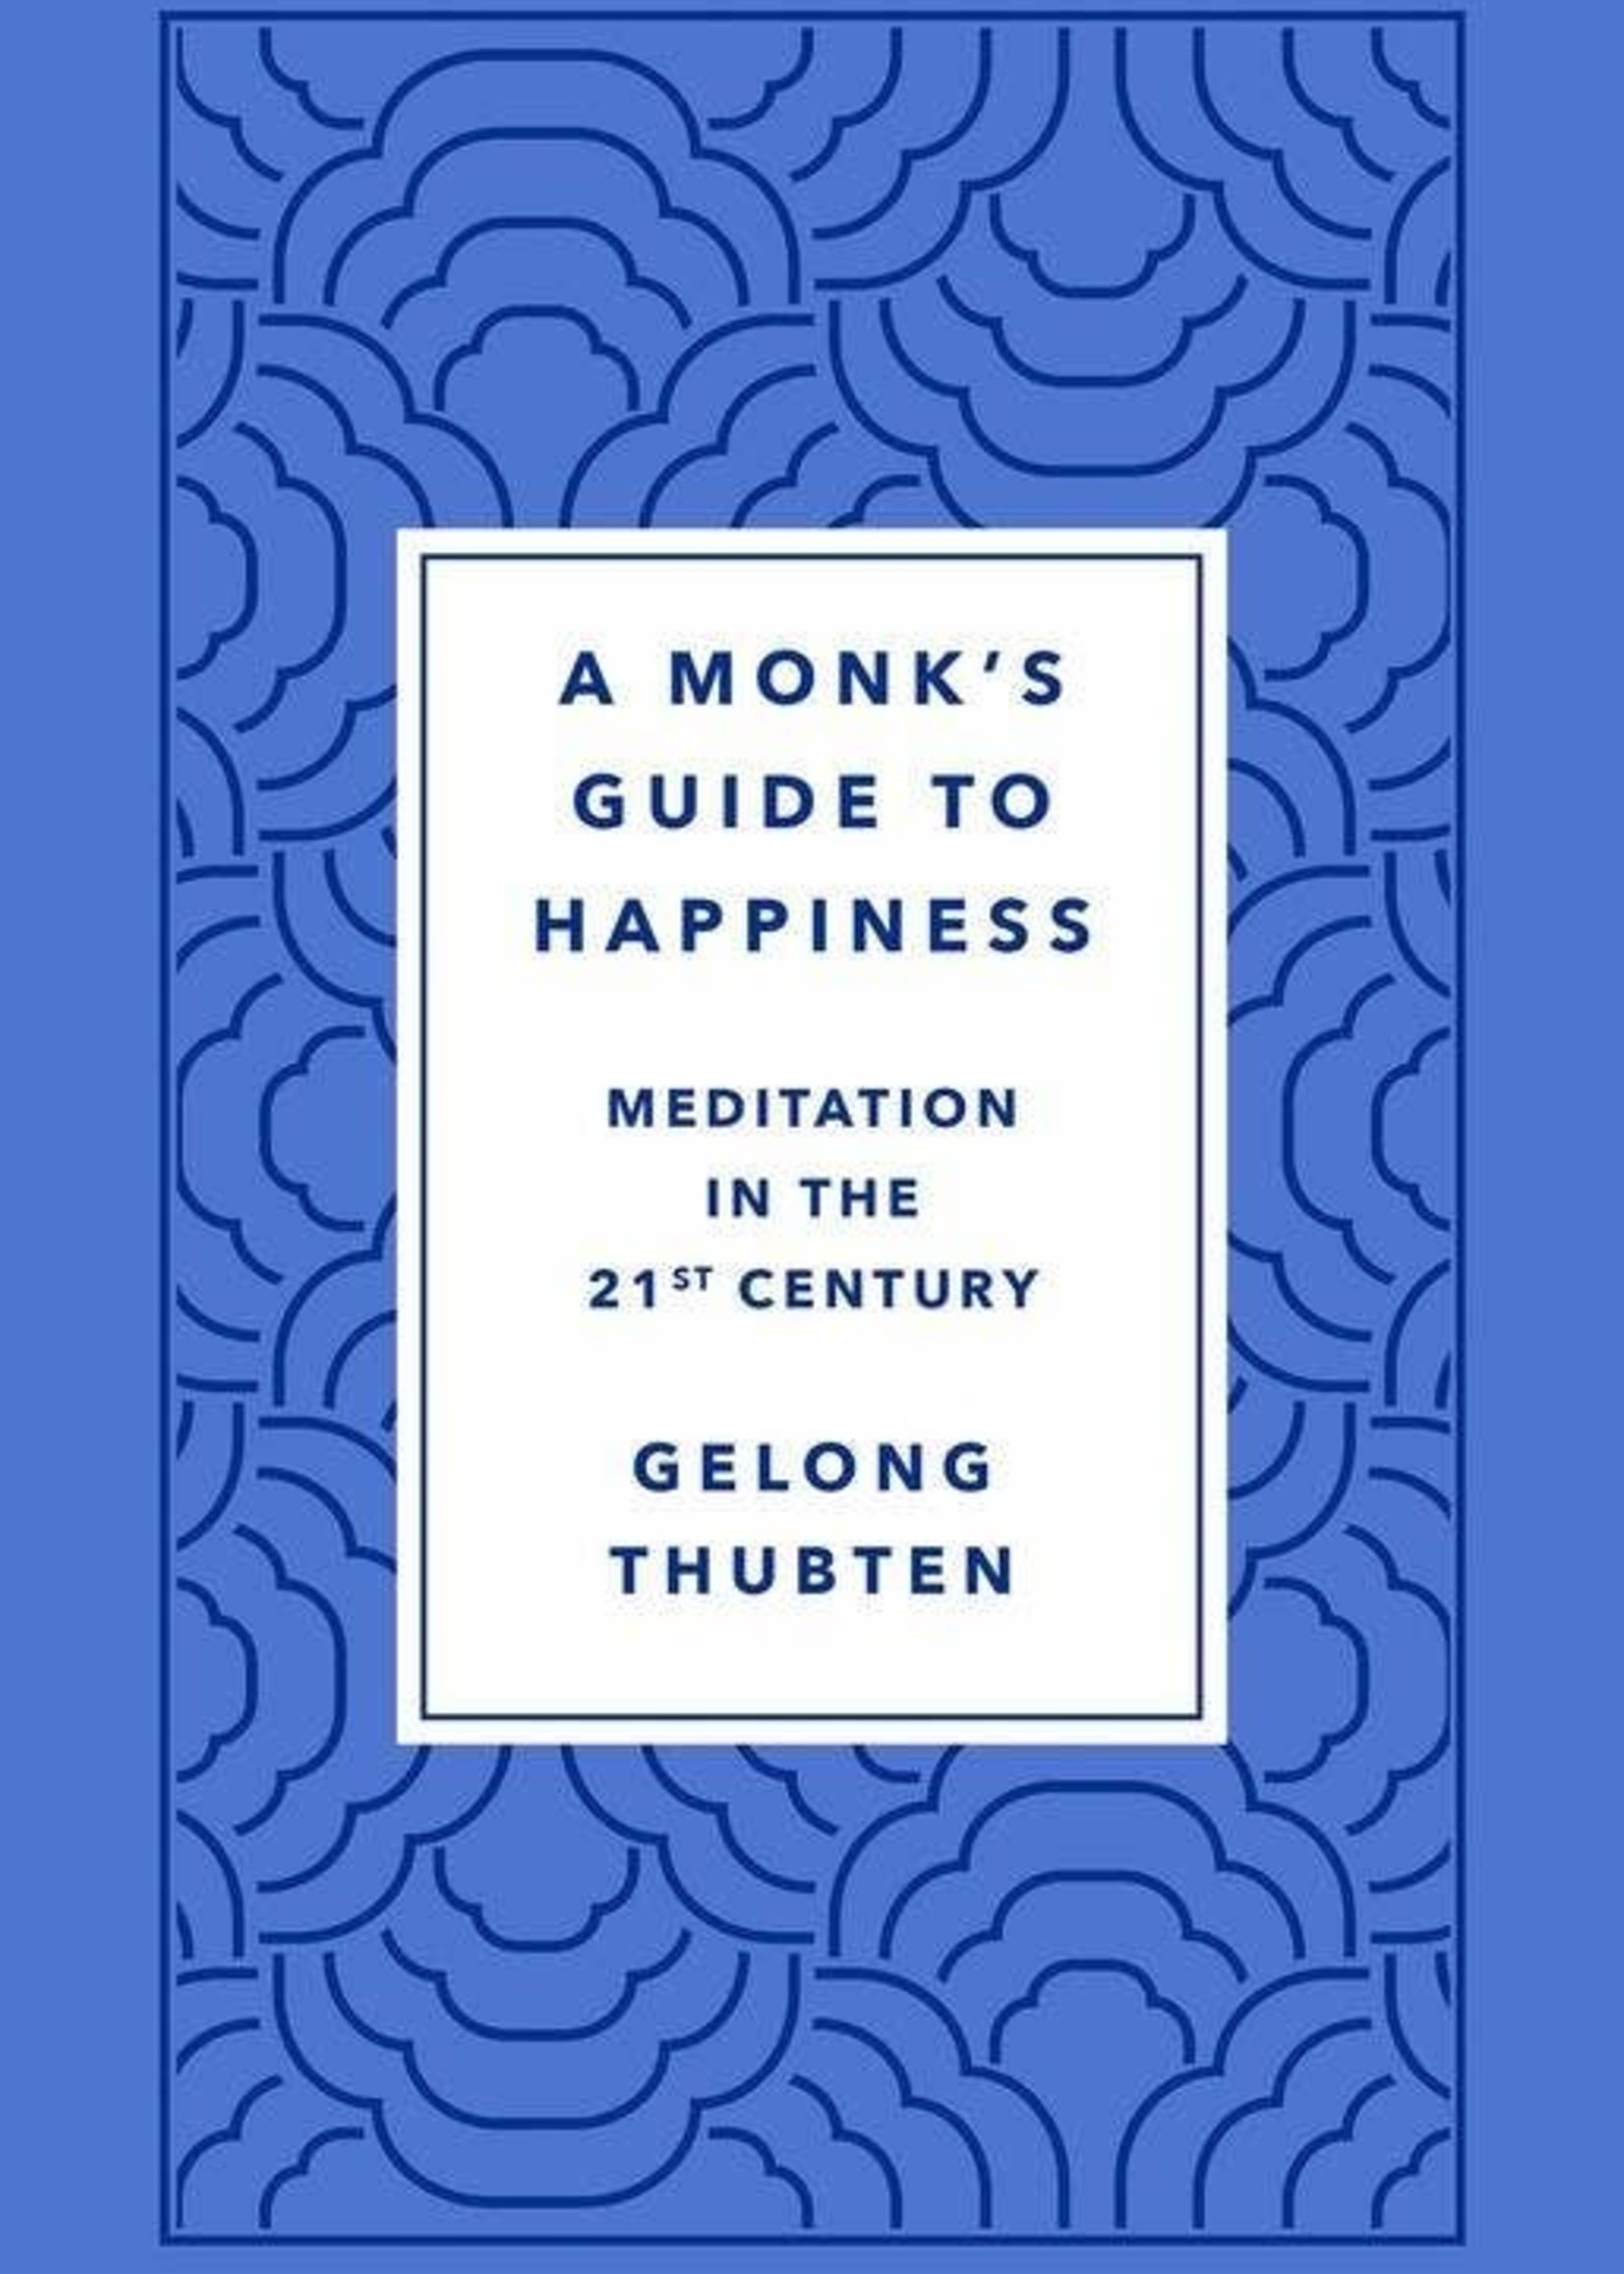 A Monk's Guide to Happiness: Meditation in the 21st Century